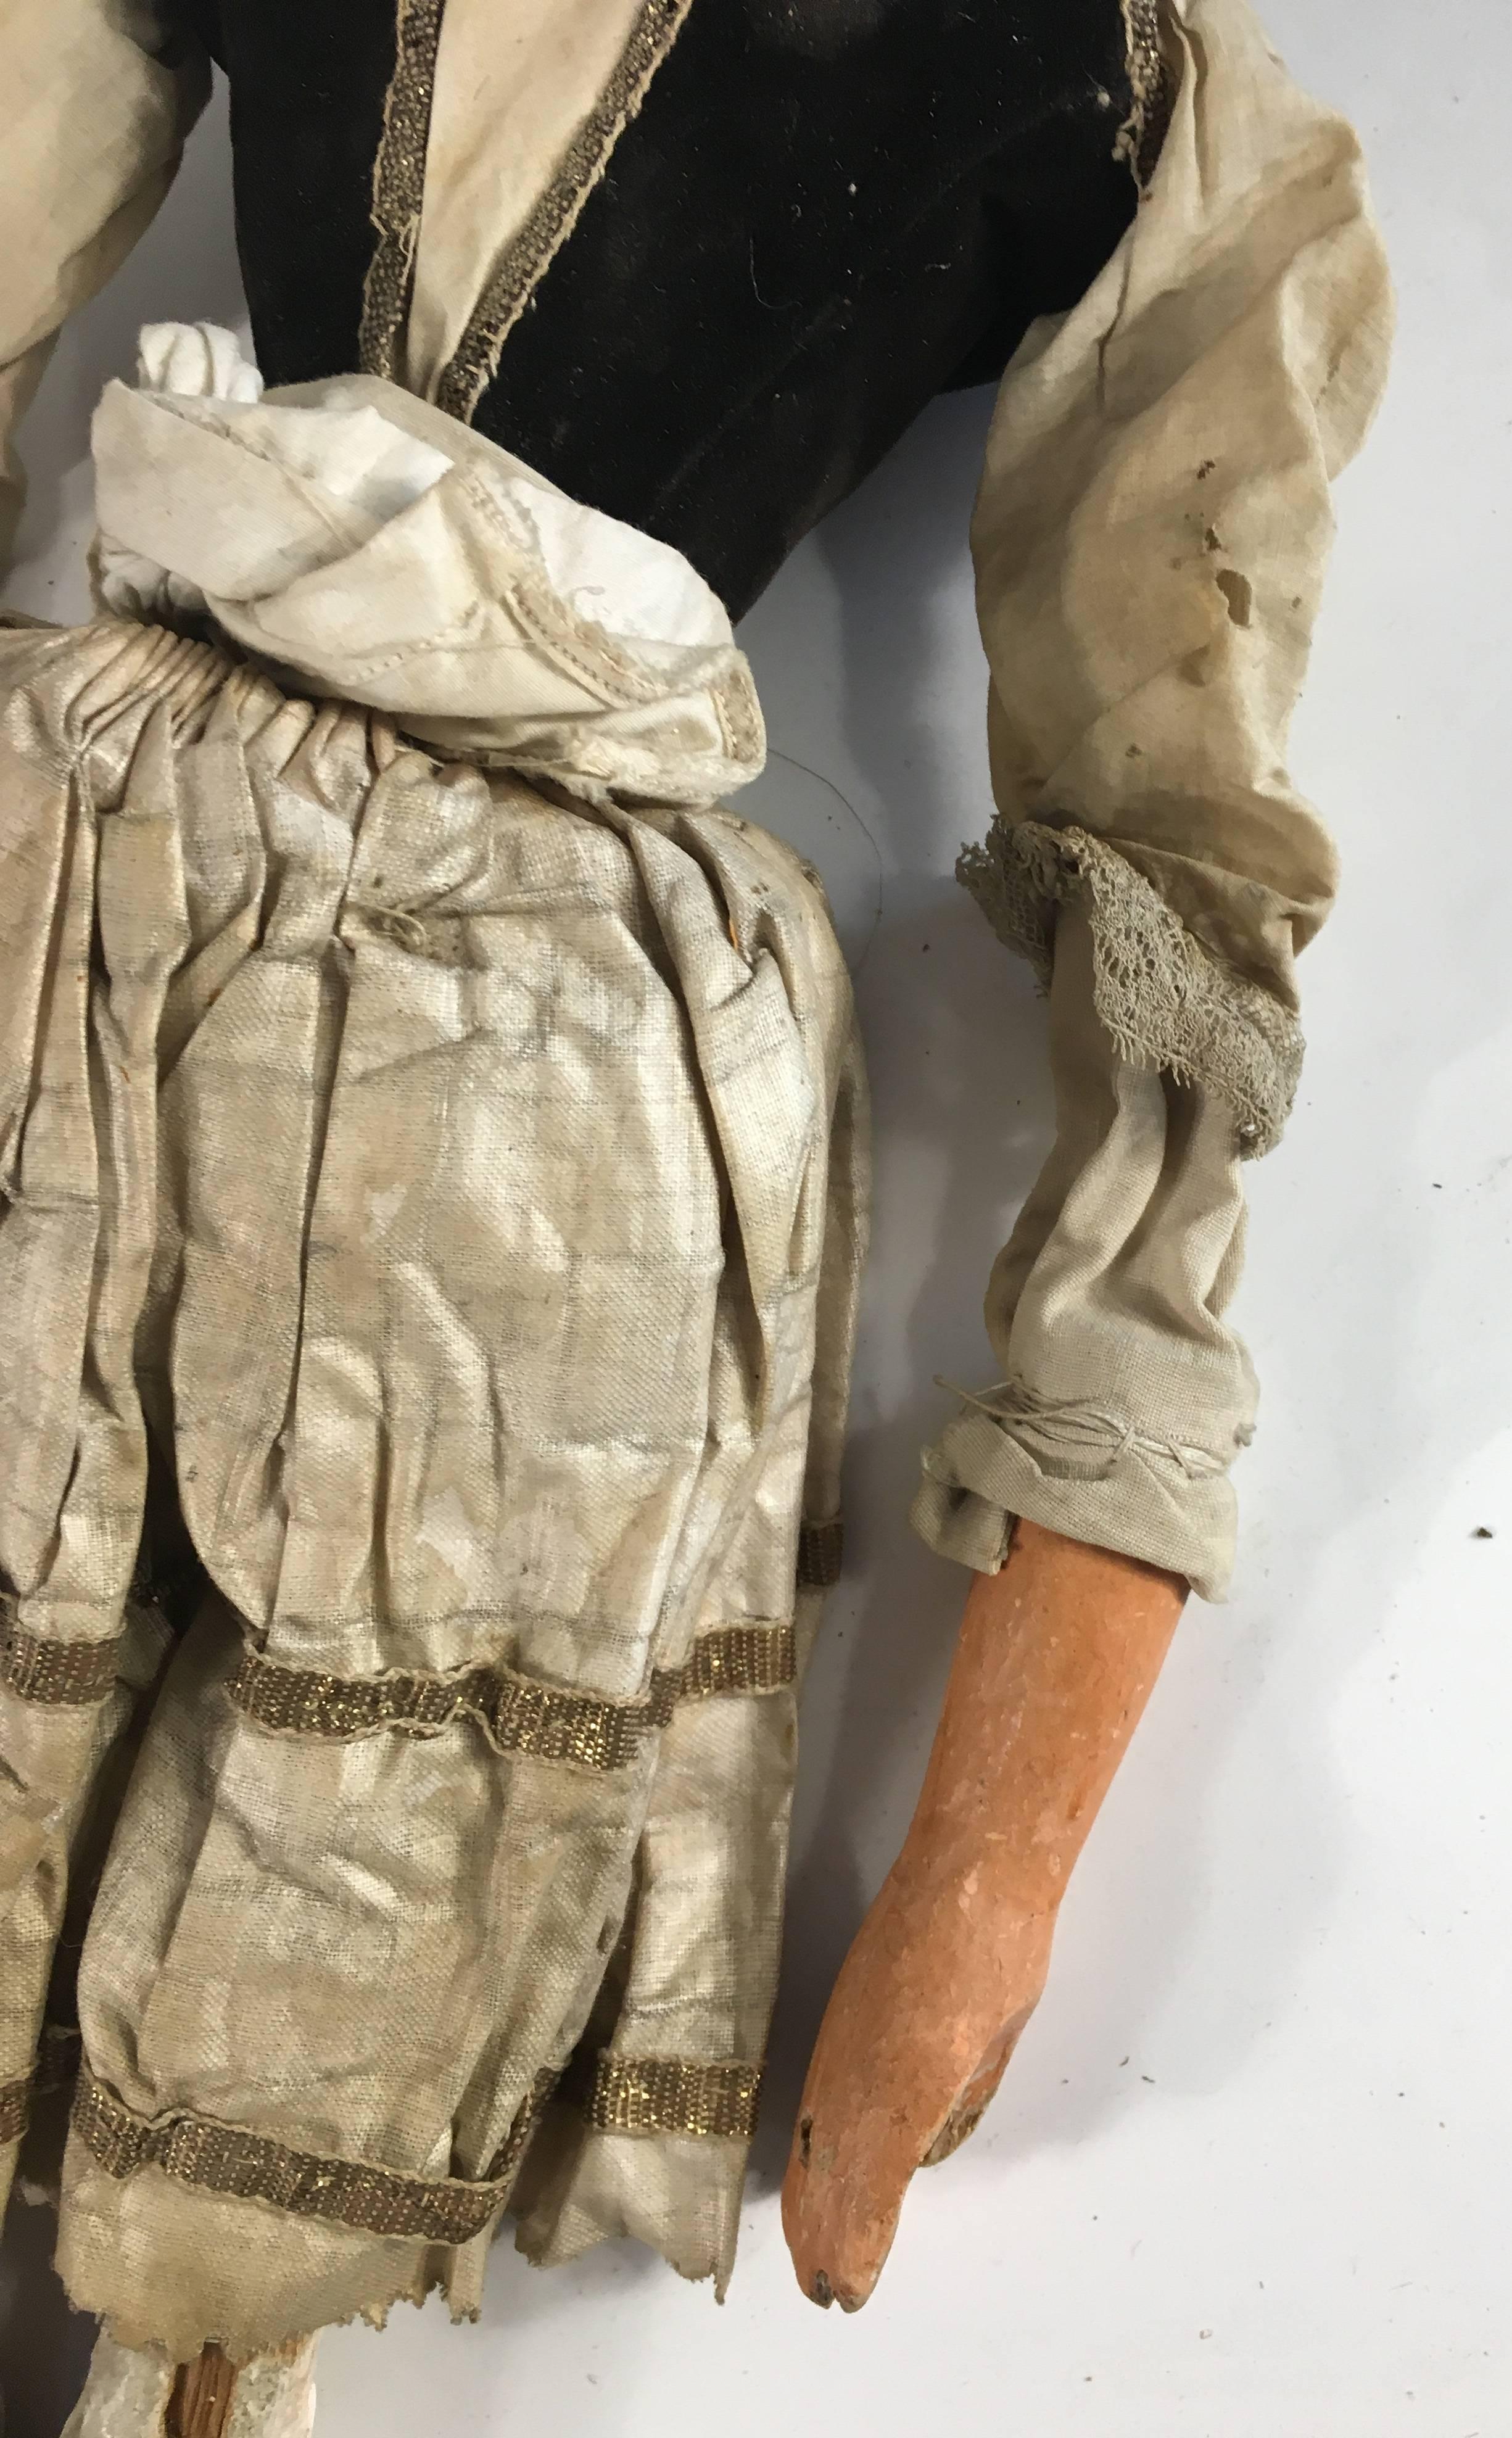 Carved 19th Century, Italian Puppet